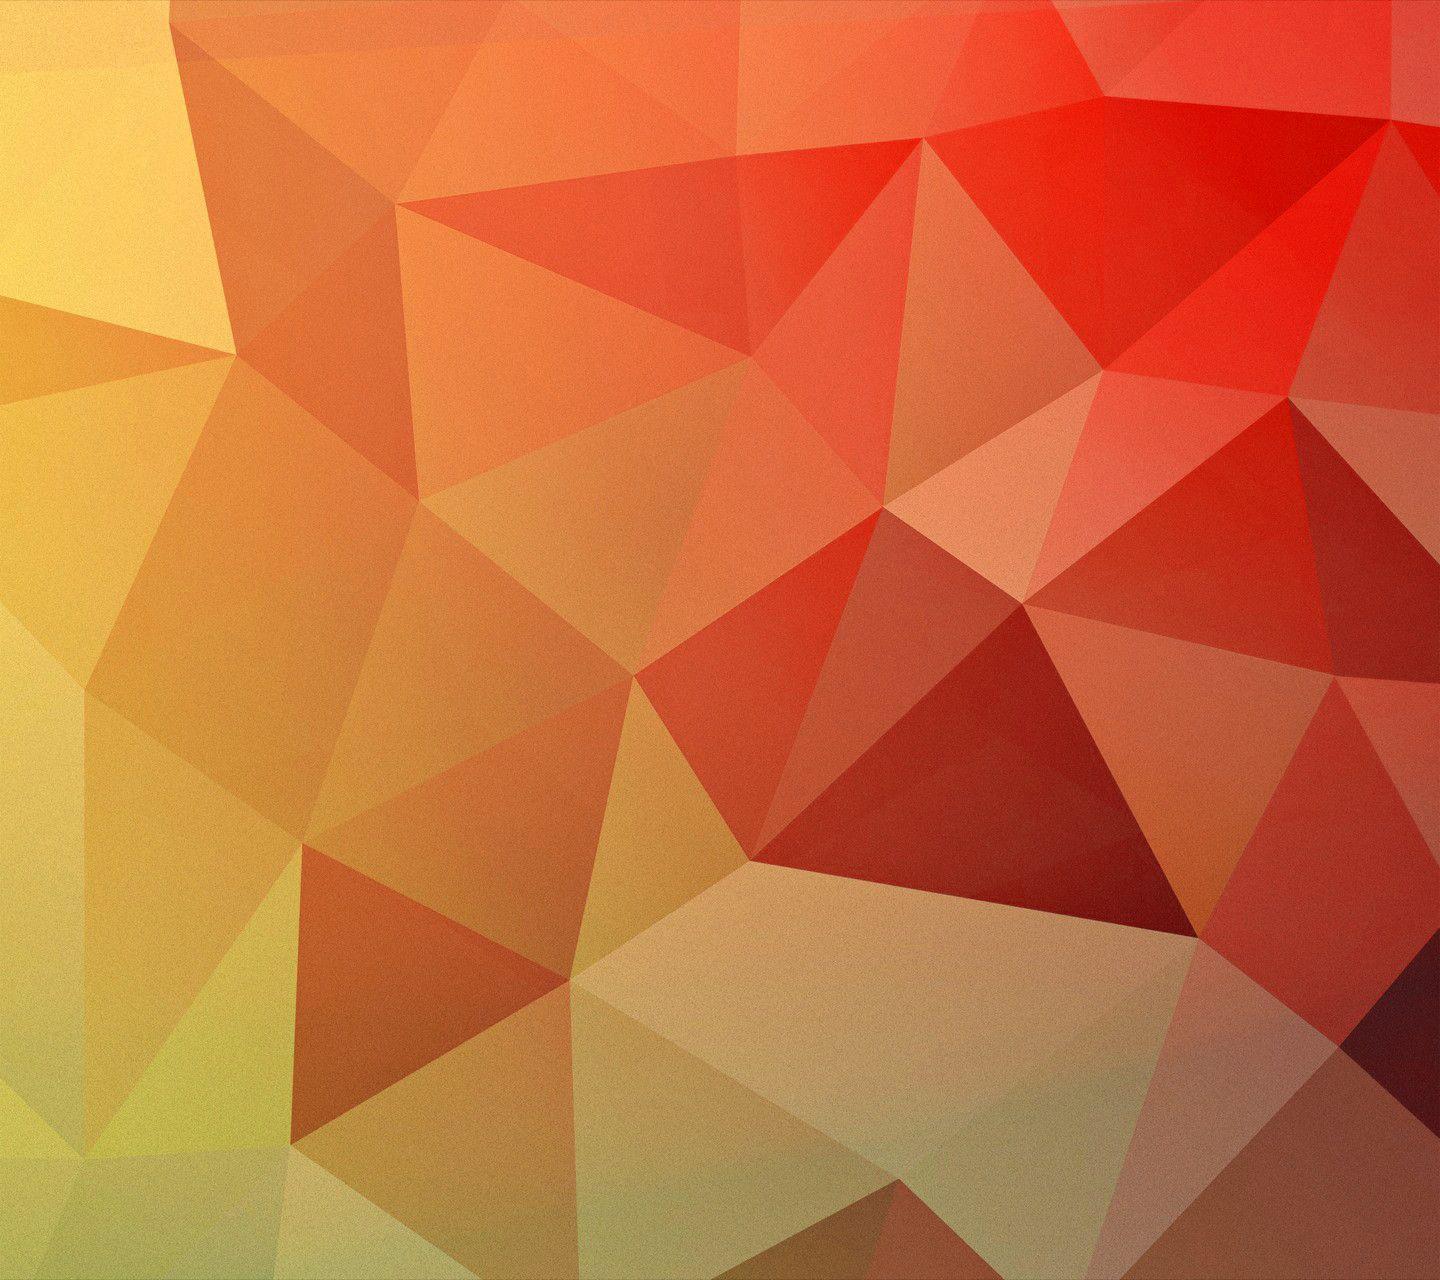 Nexus 4 system dump is out: 4.2 Jelly Bean apps, wallpaper